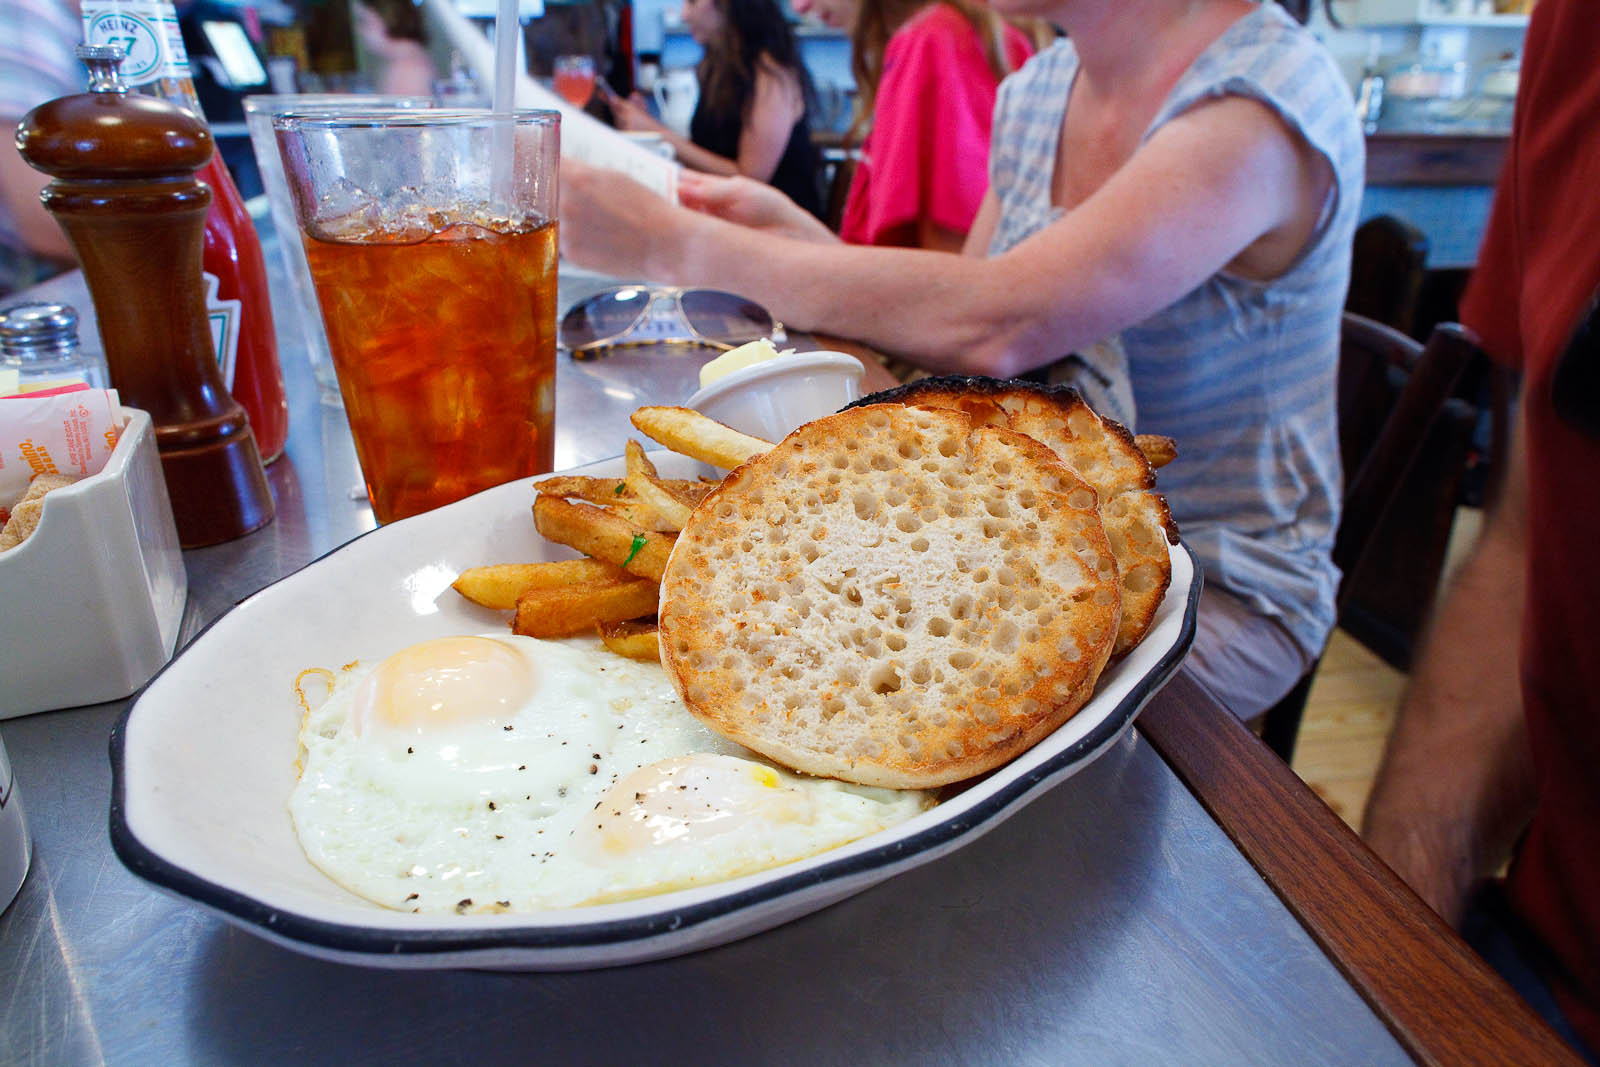 Two eggs over easy, french fries, english muffin ($8.5)